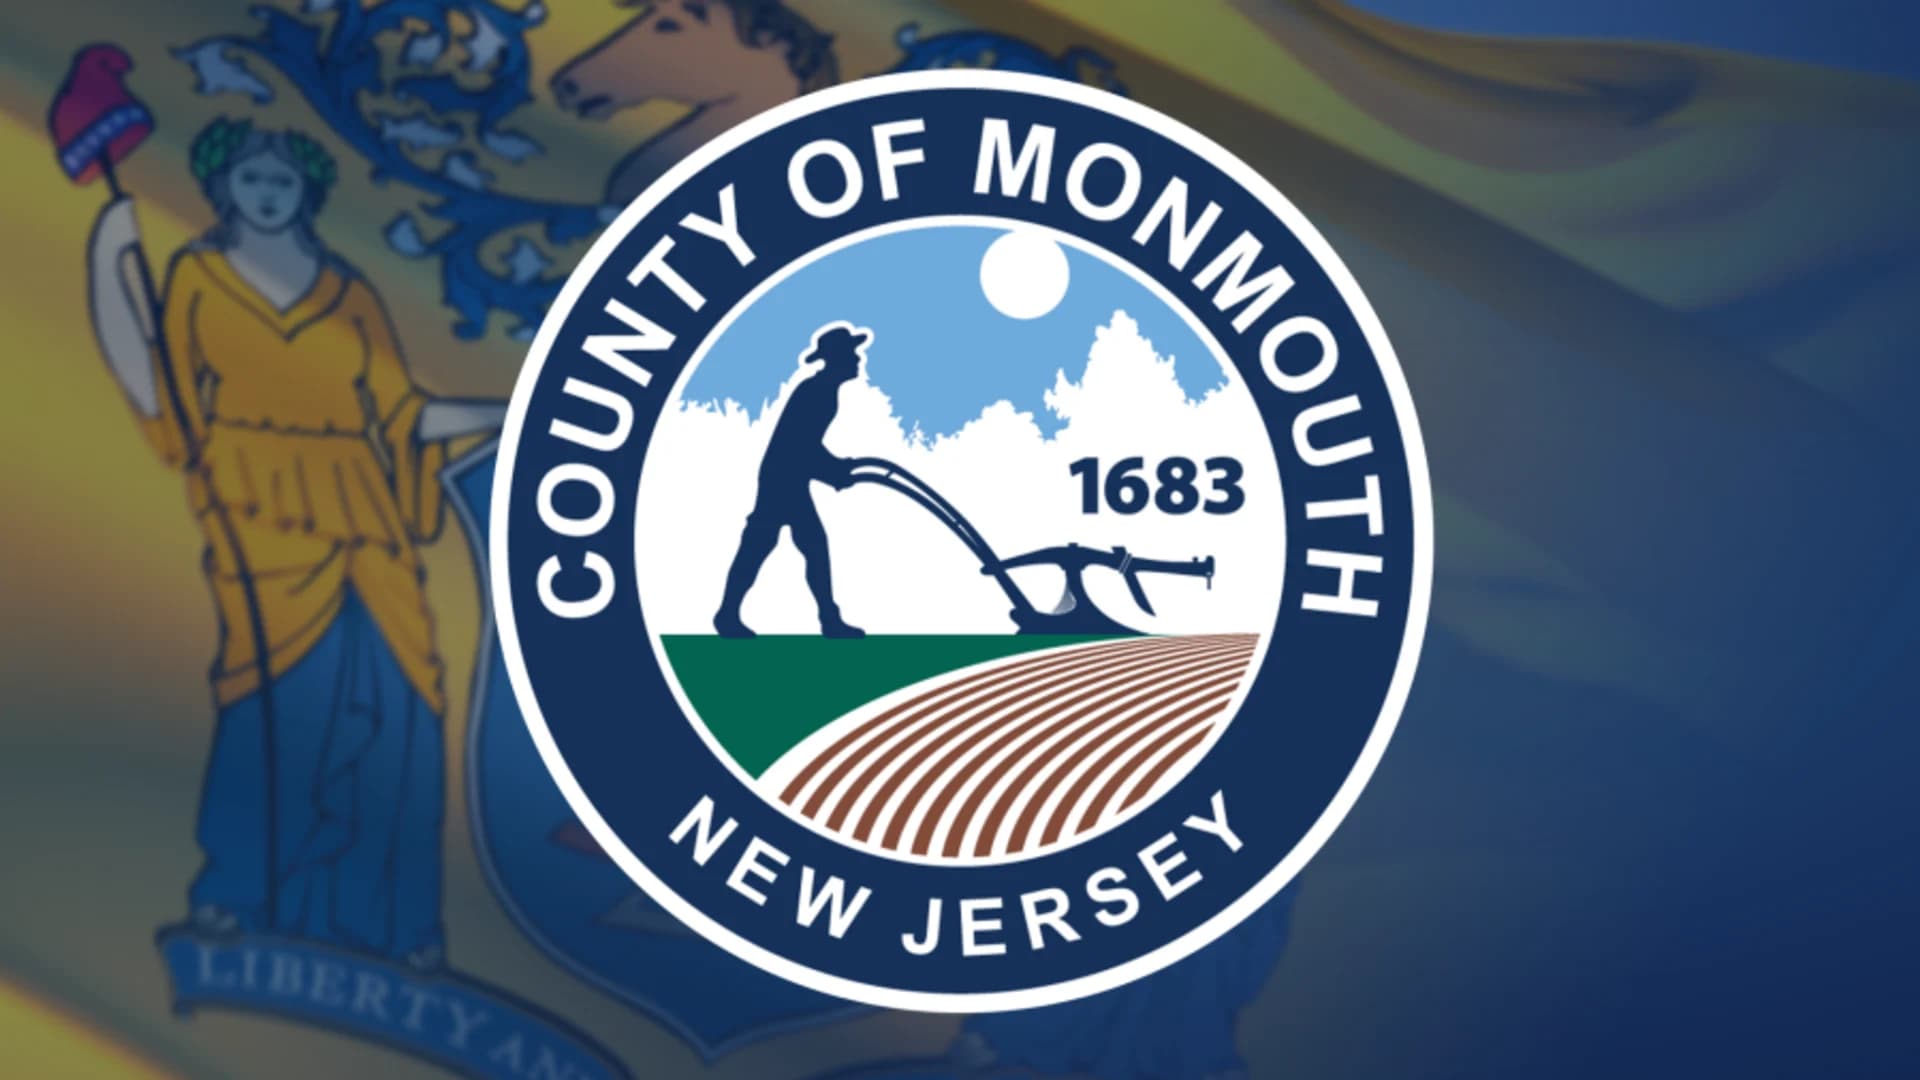 WATCH: Monmouth County Freeholders provide COVID-19 updates